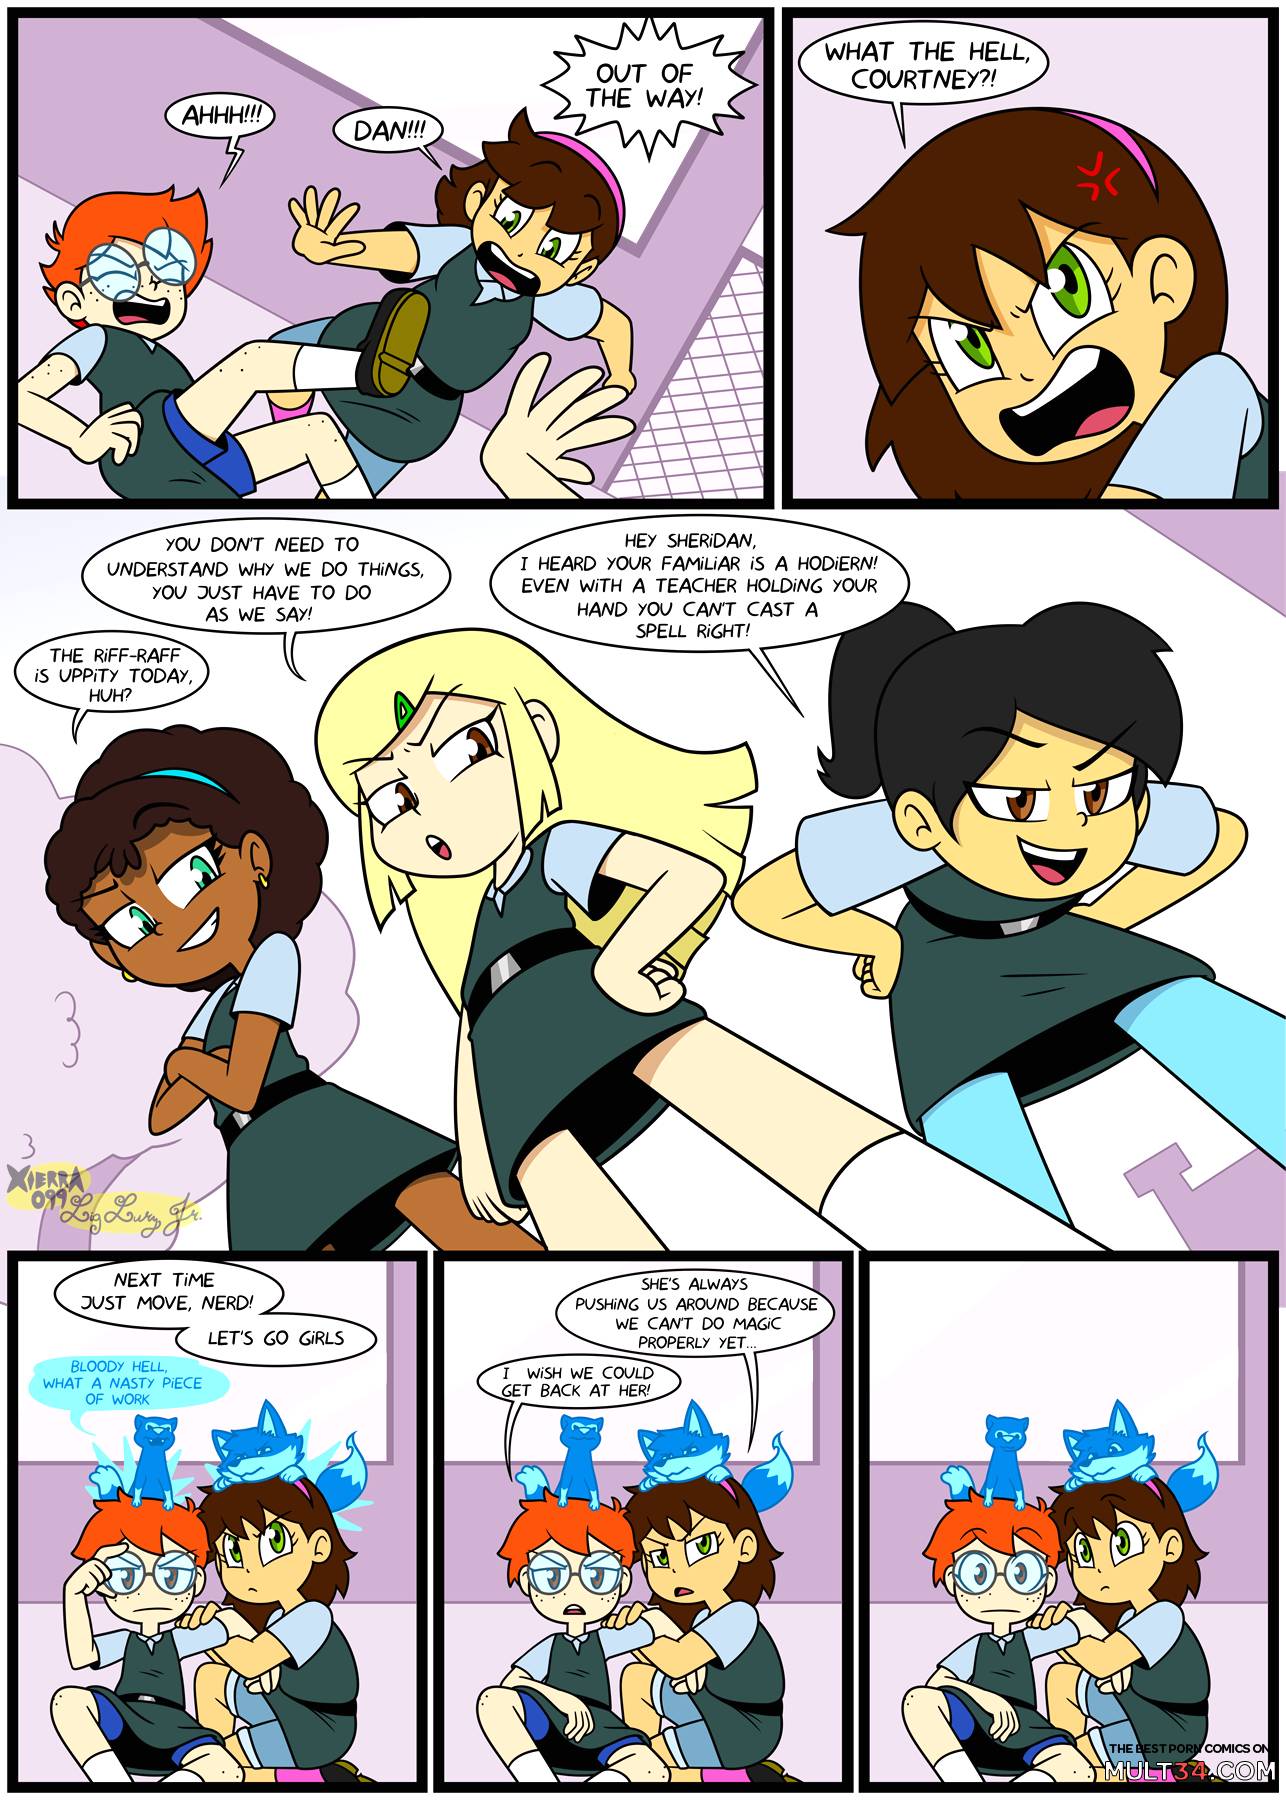 St. Heretic's Academia page 7